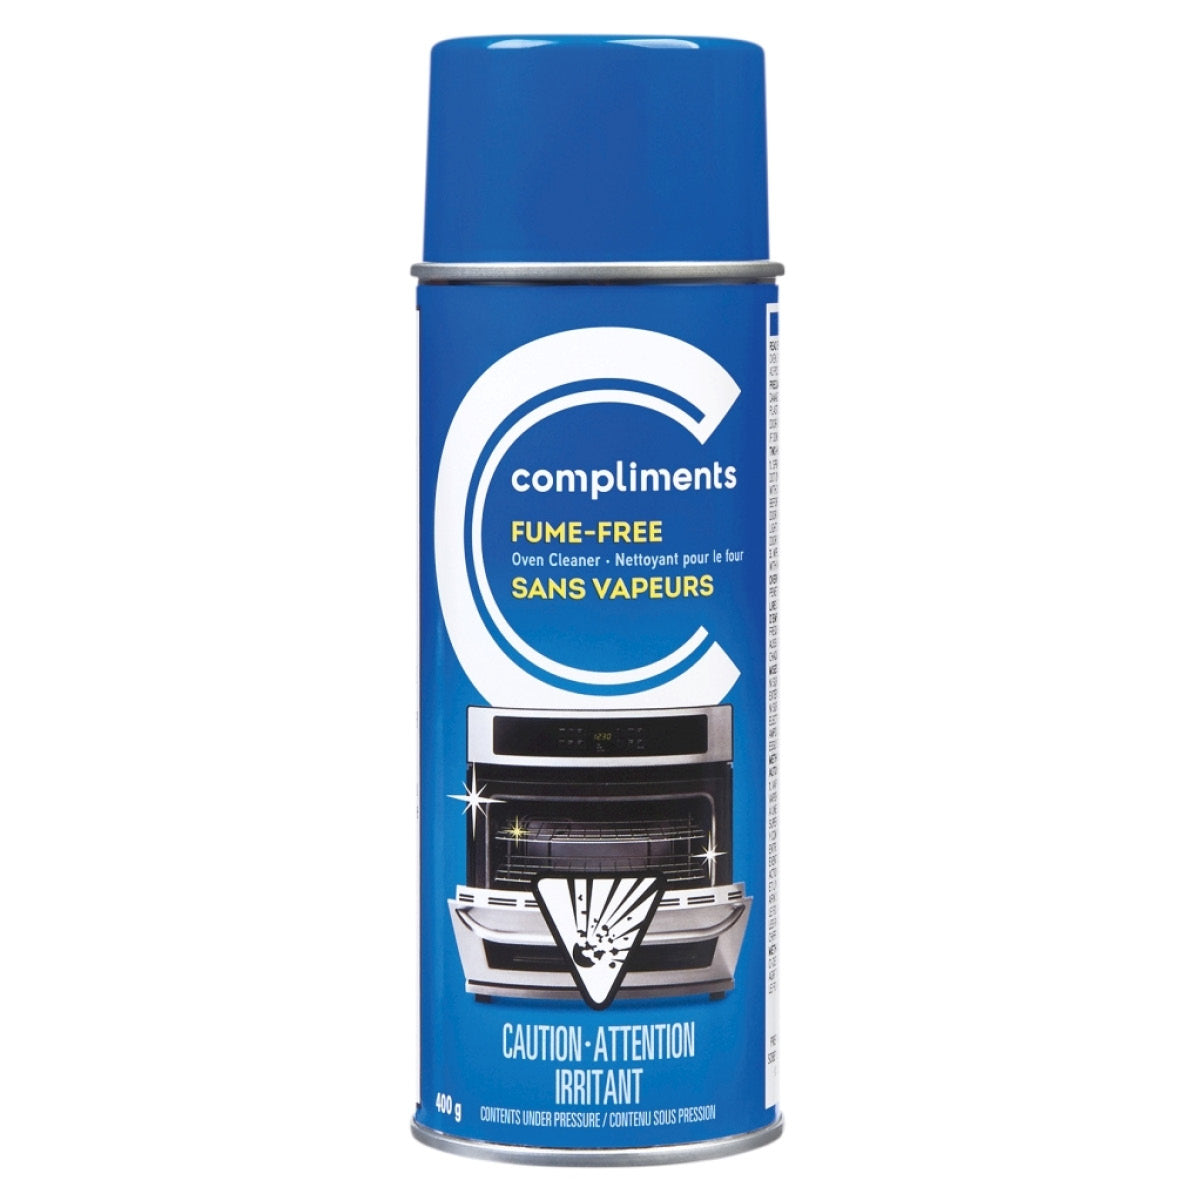 Compliments Oven Cleaner, Fume Free, 400g